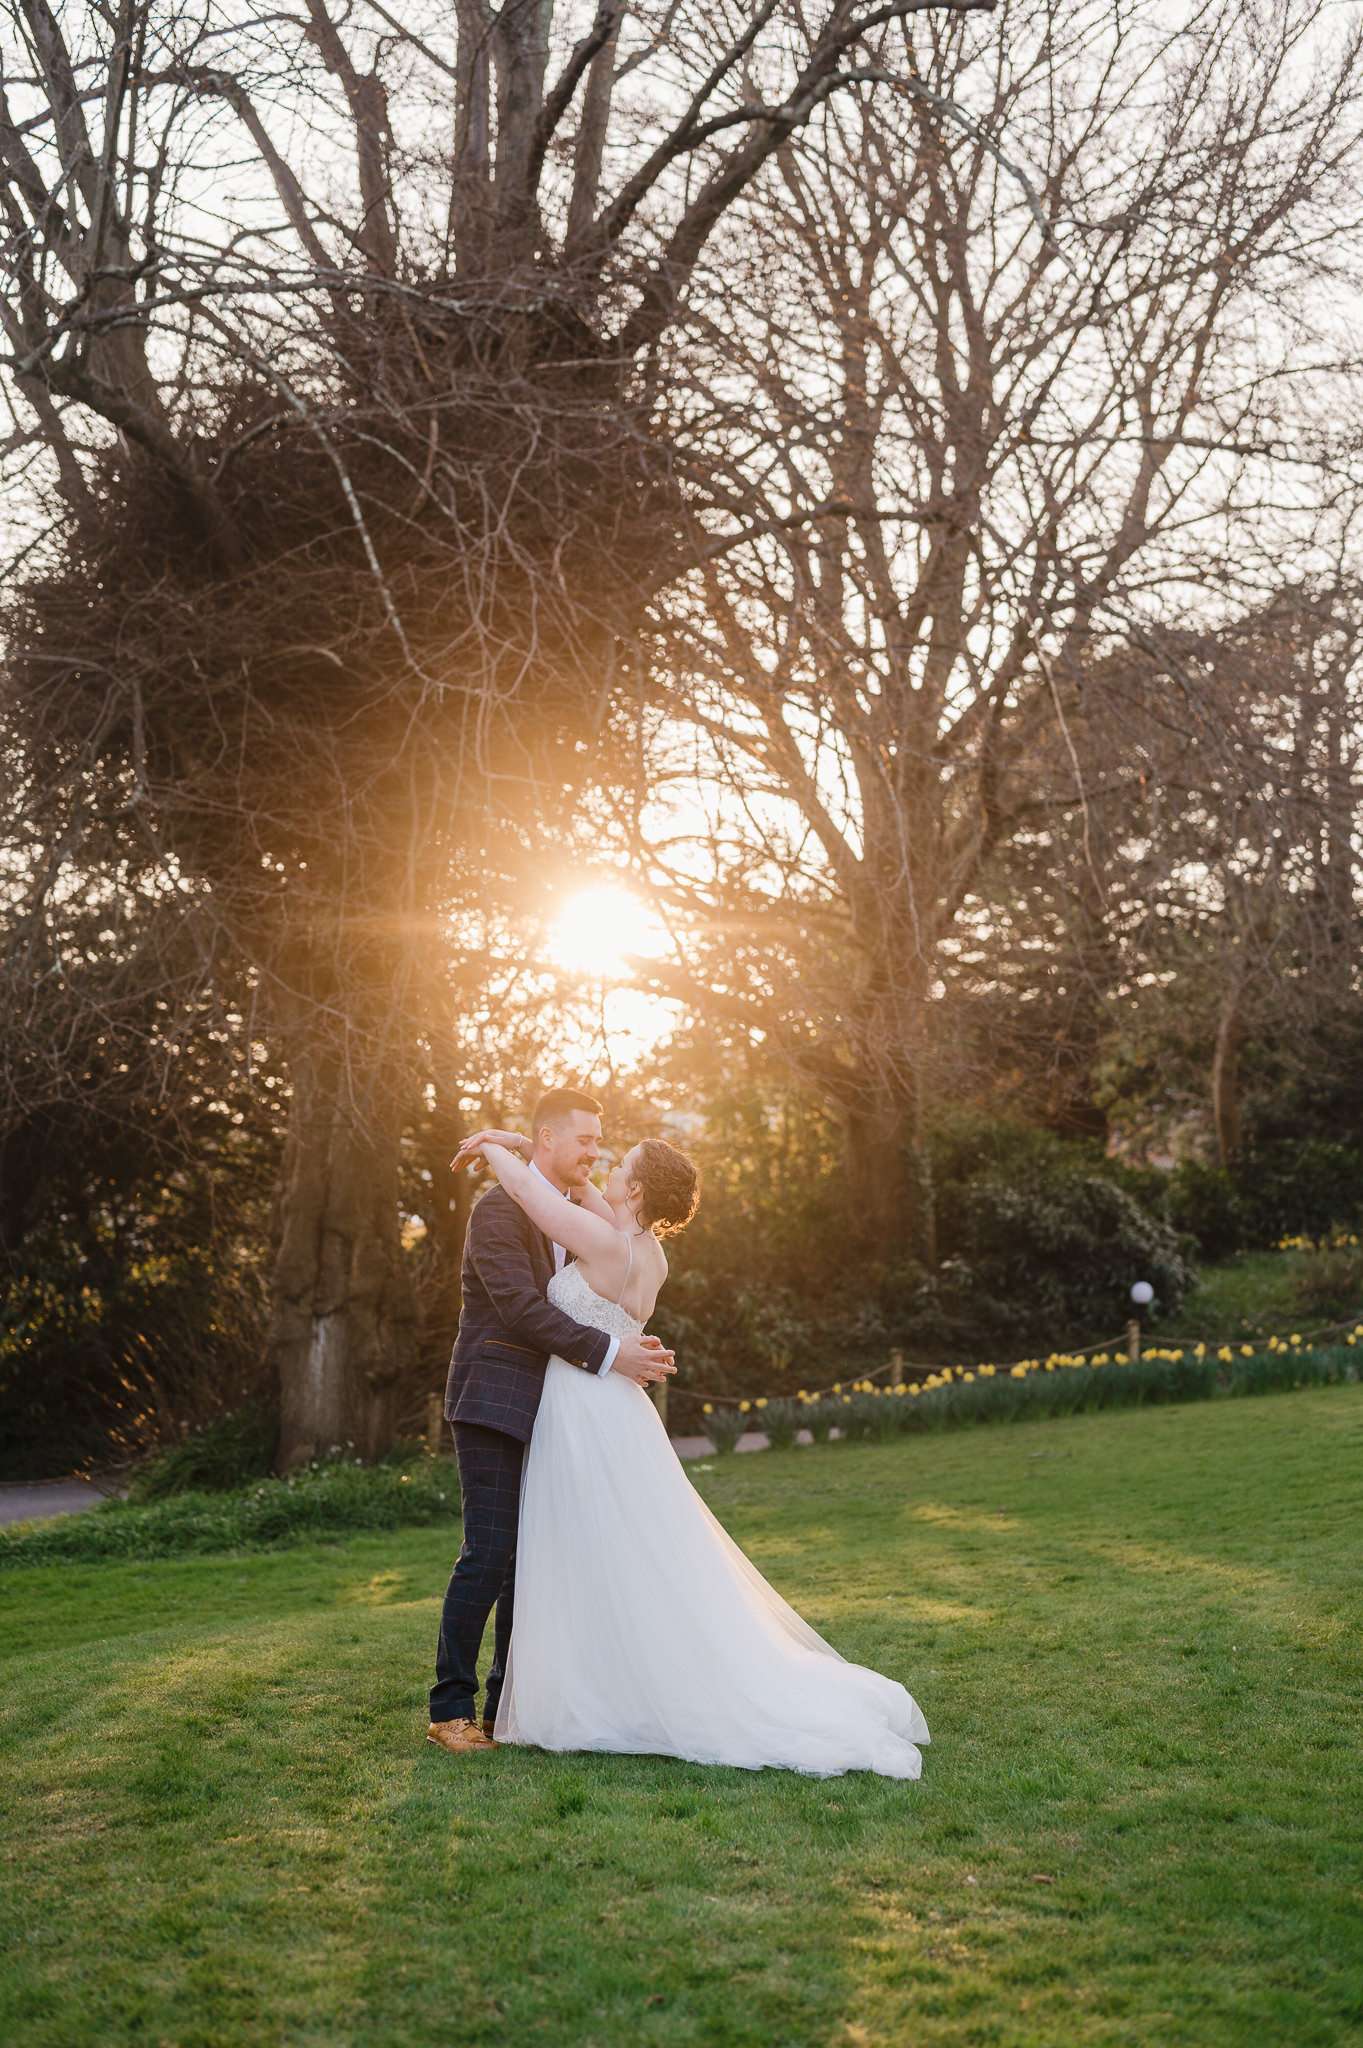 My Guide to Wedding Planning | Cornwall Wedding Photographer | Bride and Groom at The Alverton at sunset